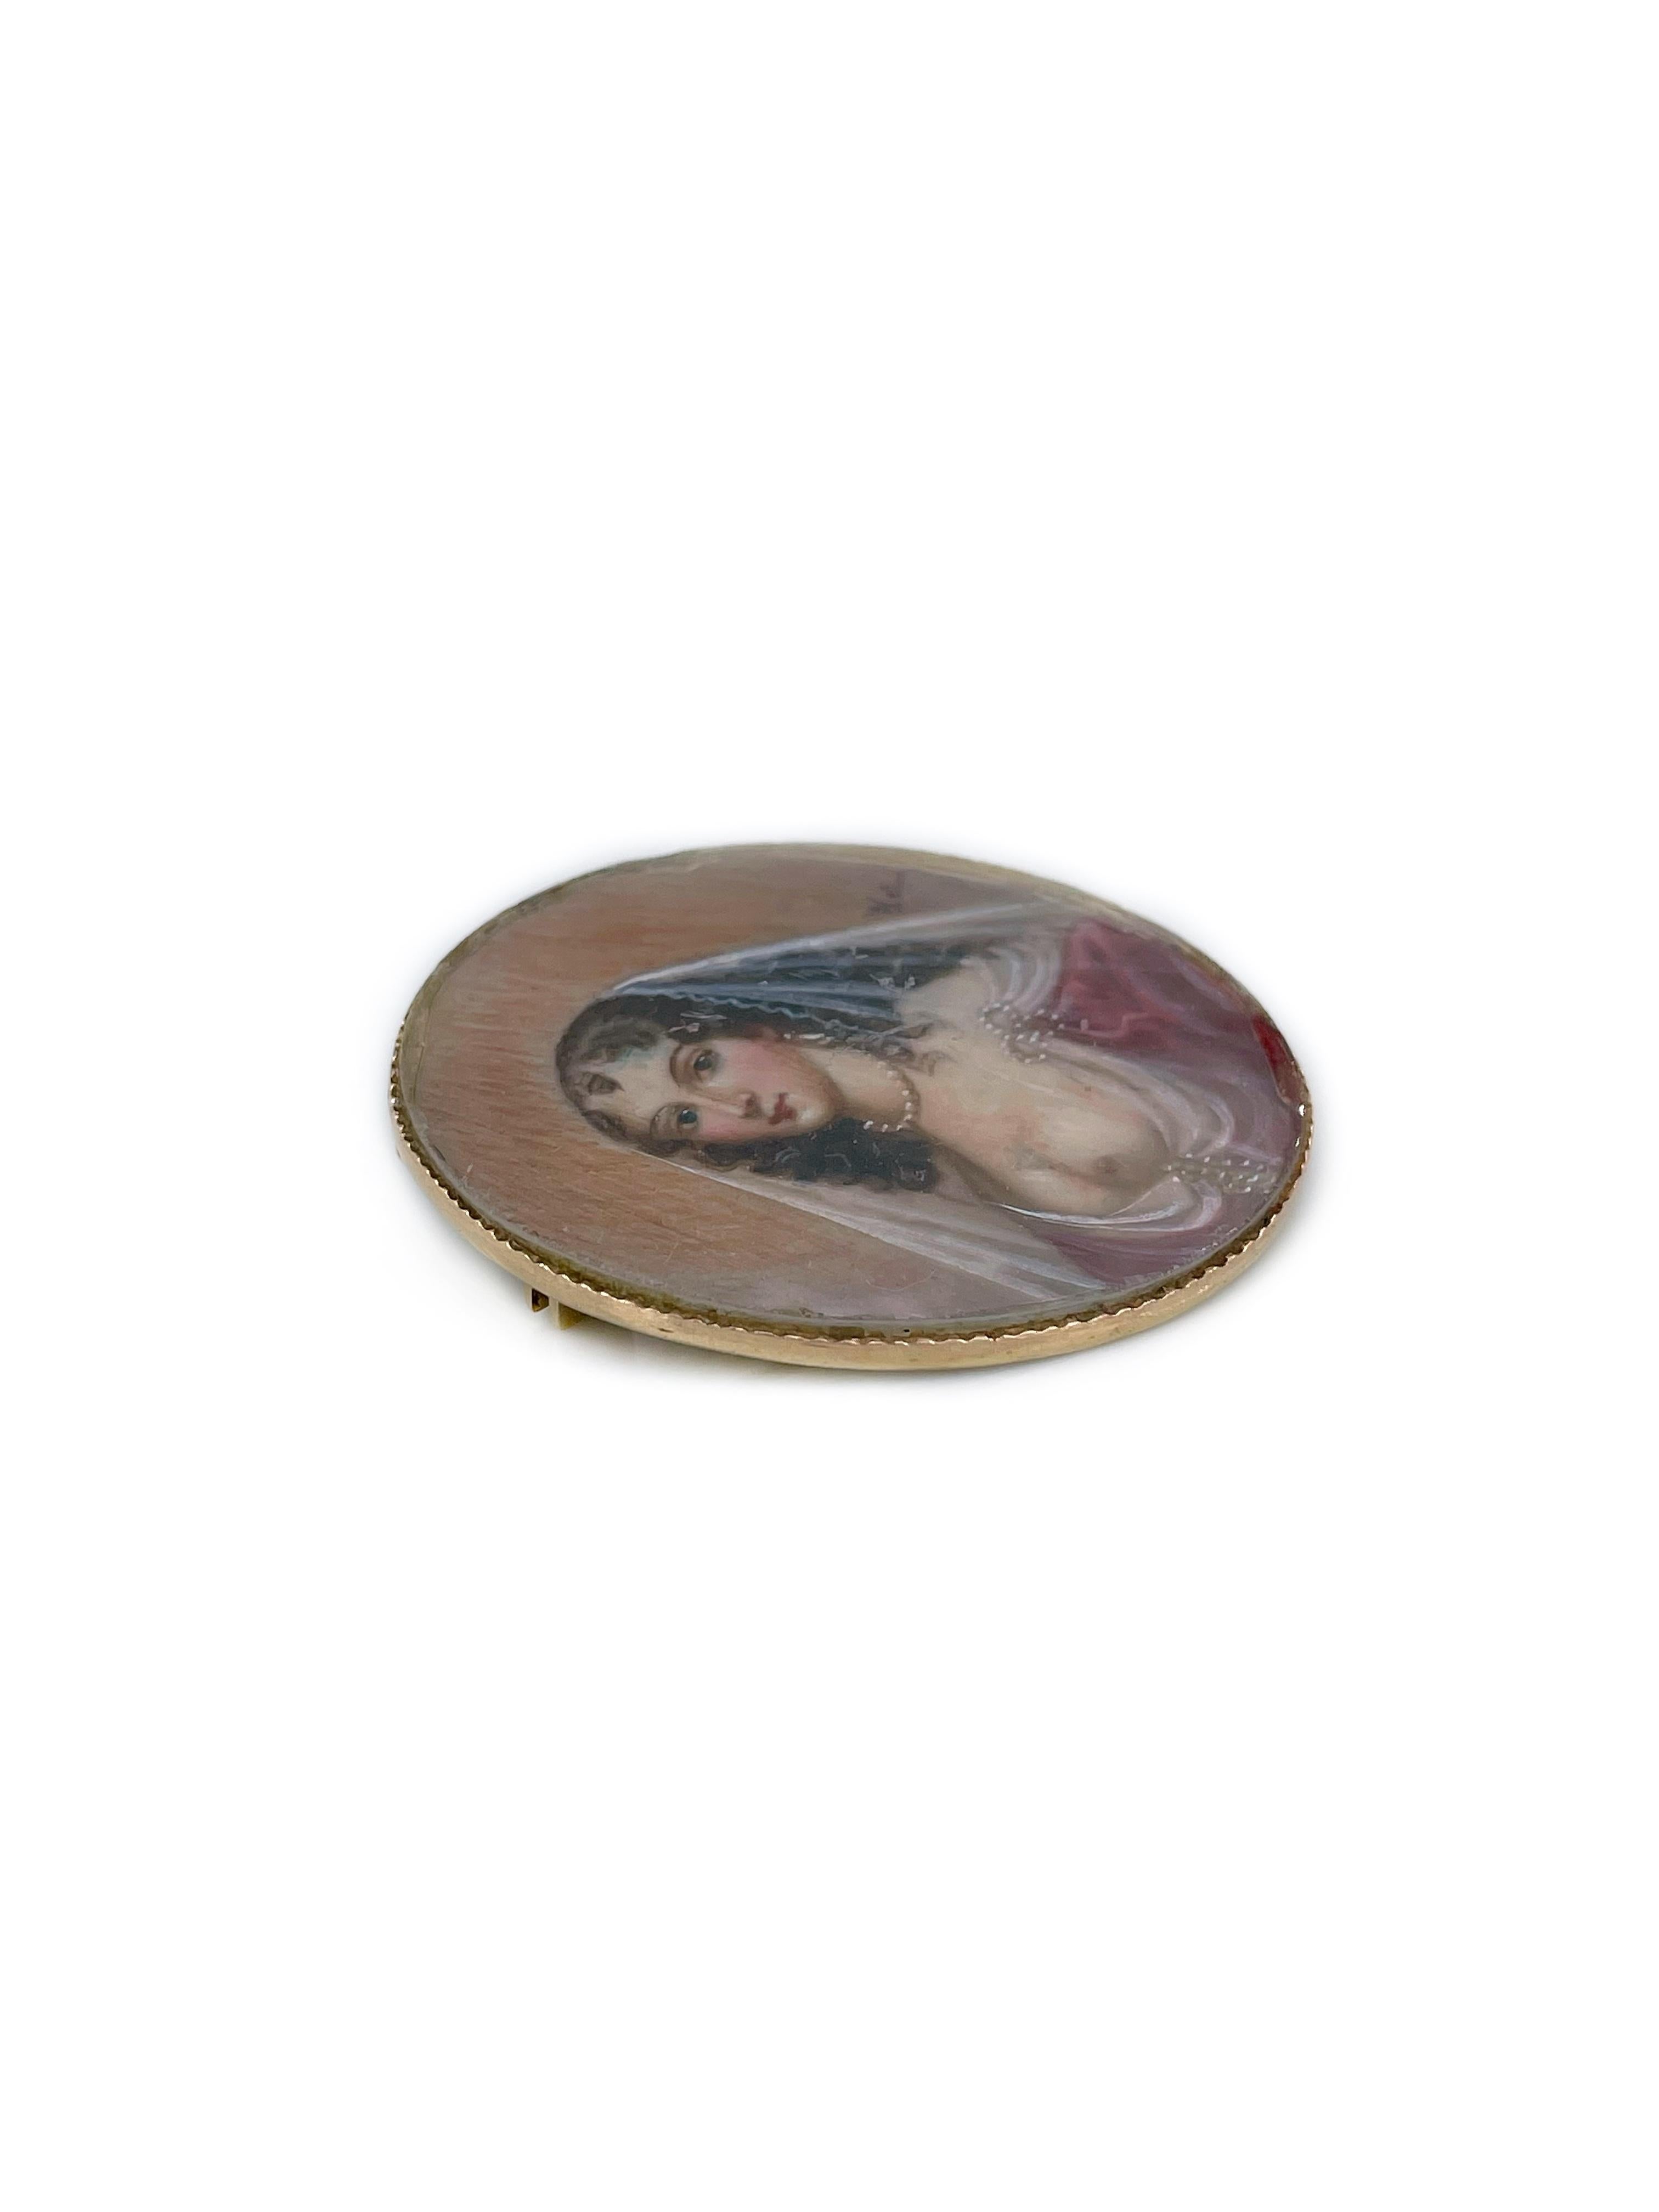 This is an exceptional Victorian pin brooch crafted in 18K yellow gold. Circa 1850.

The piece features a detailed miniature portrait of a lady wearing pearls. It is hand painted and covered with glass. There is a signature of an author. 

Weight: